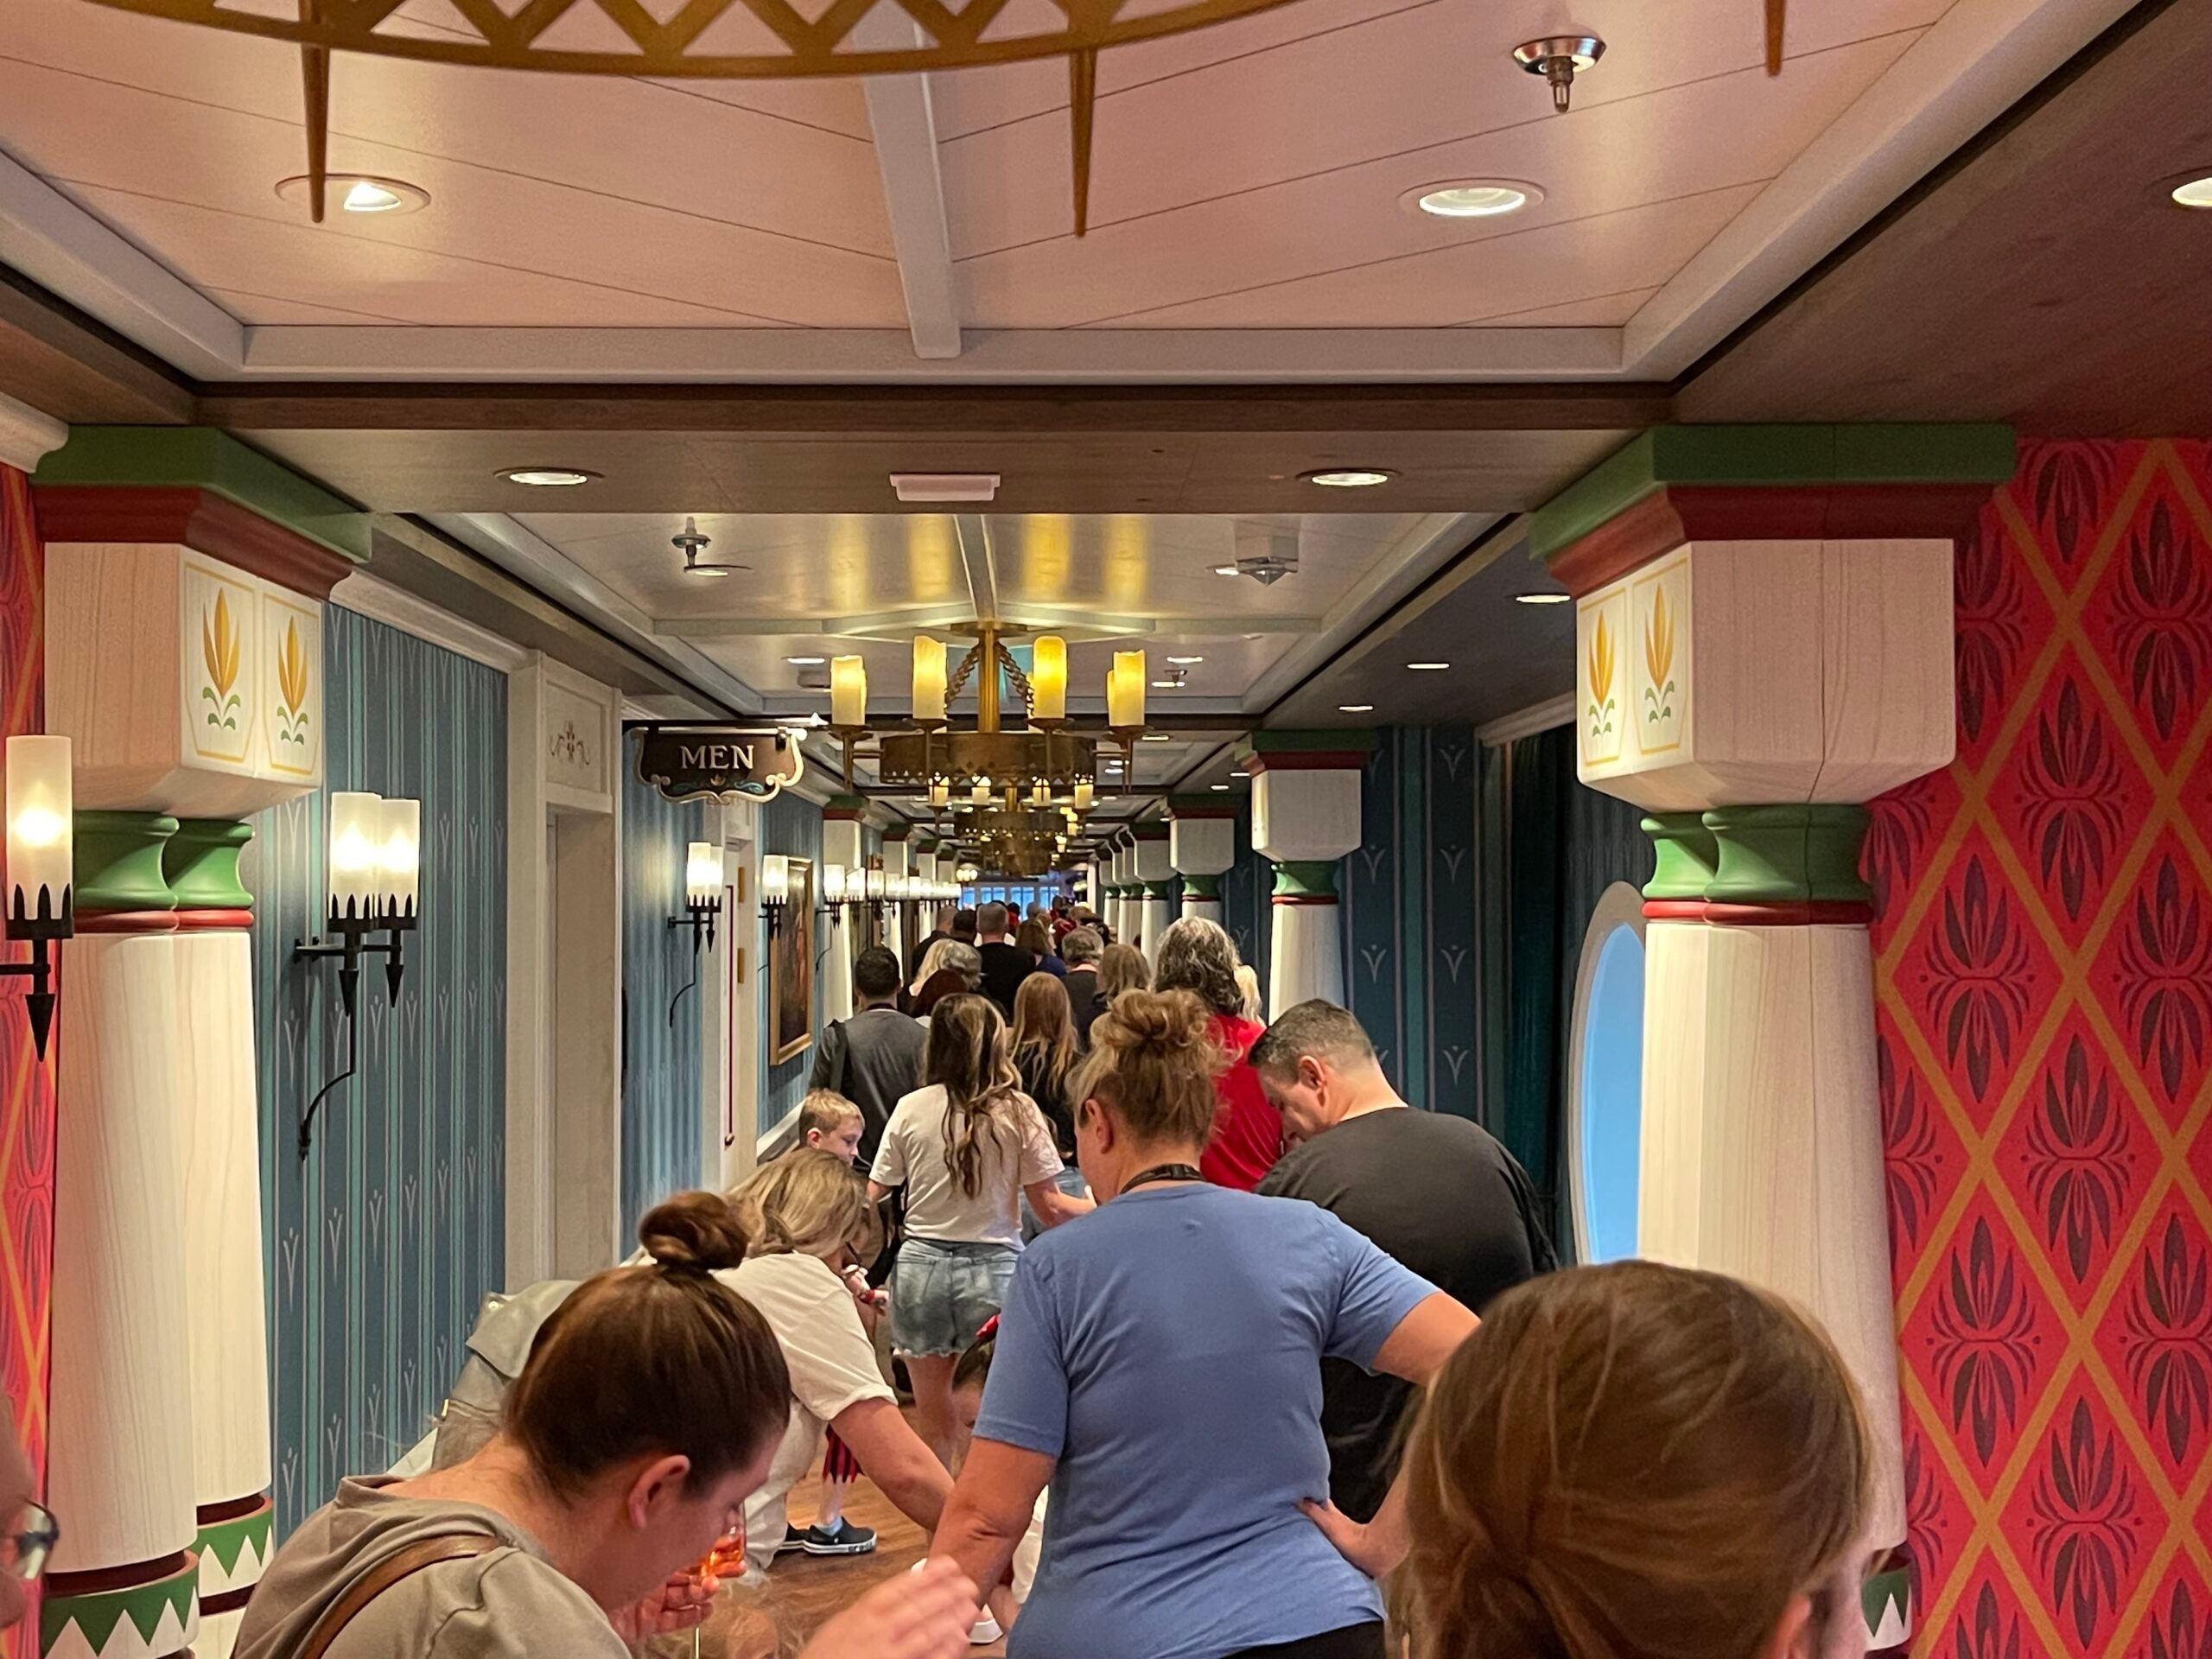 Line for Arendale on Disney Wish